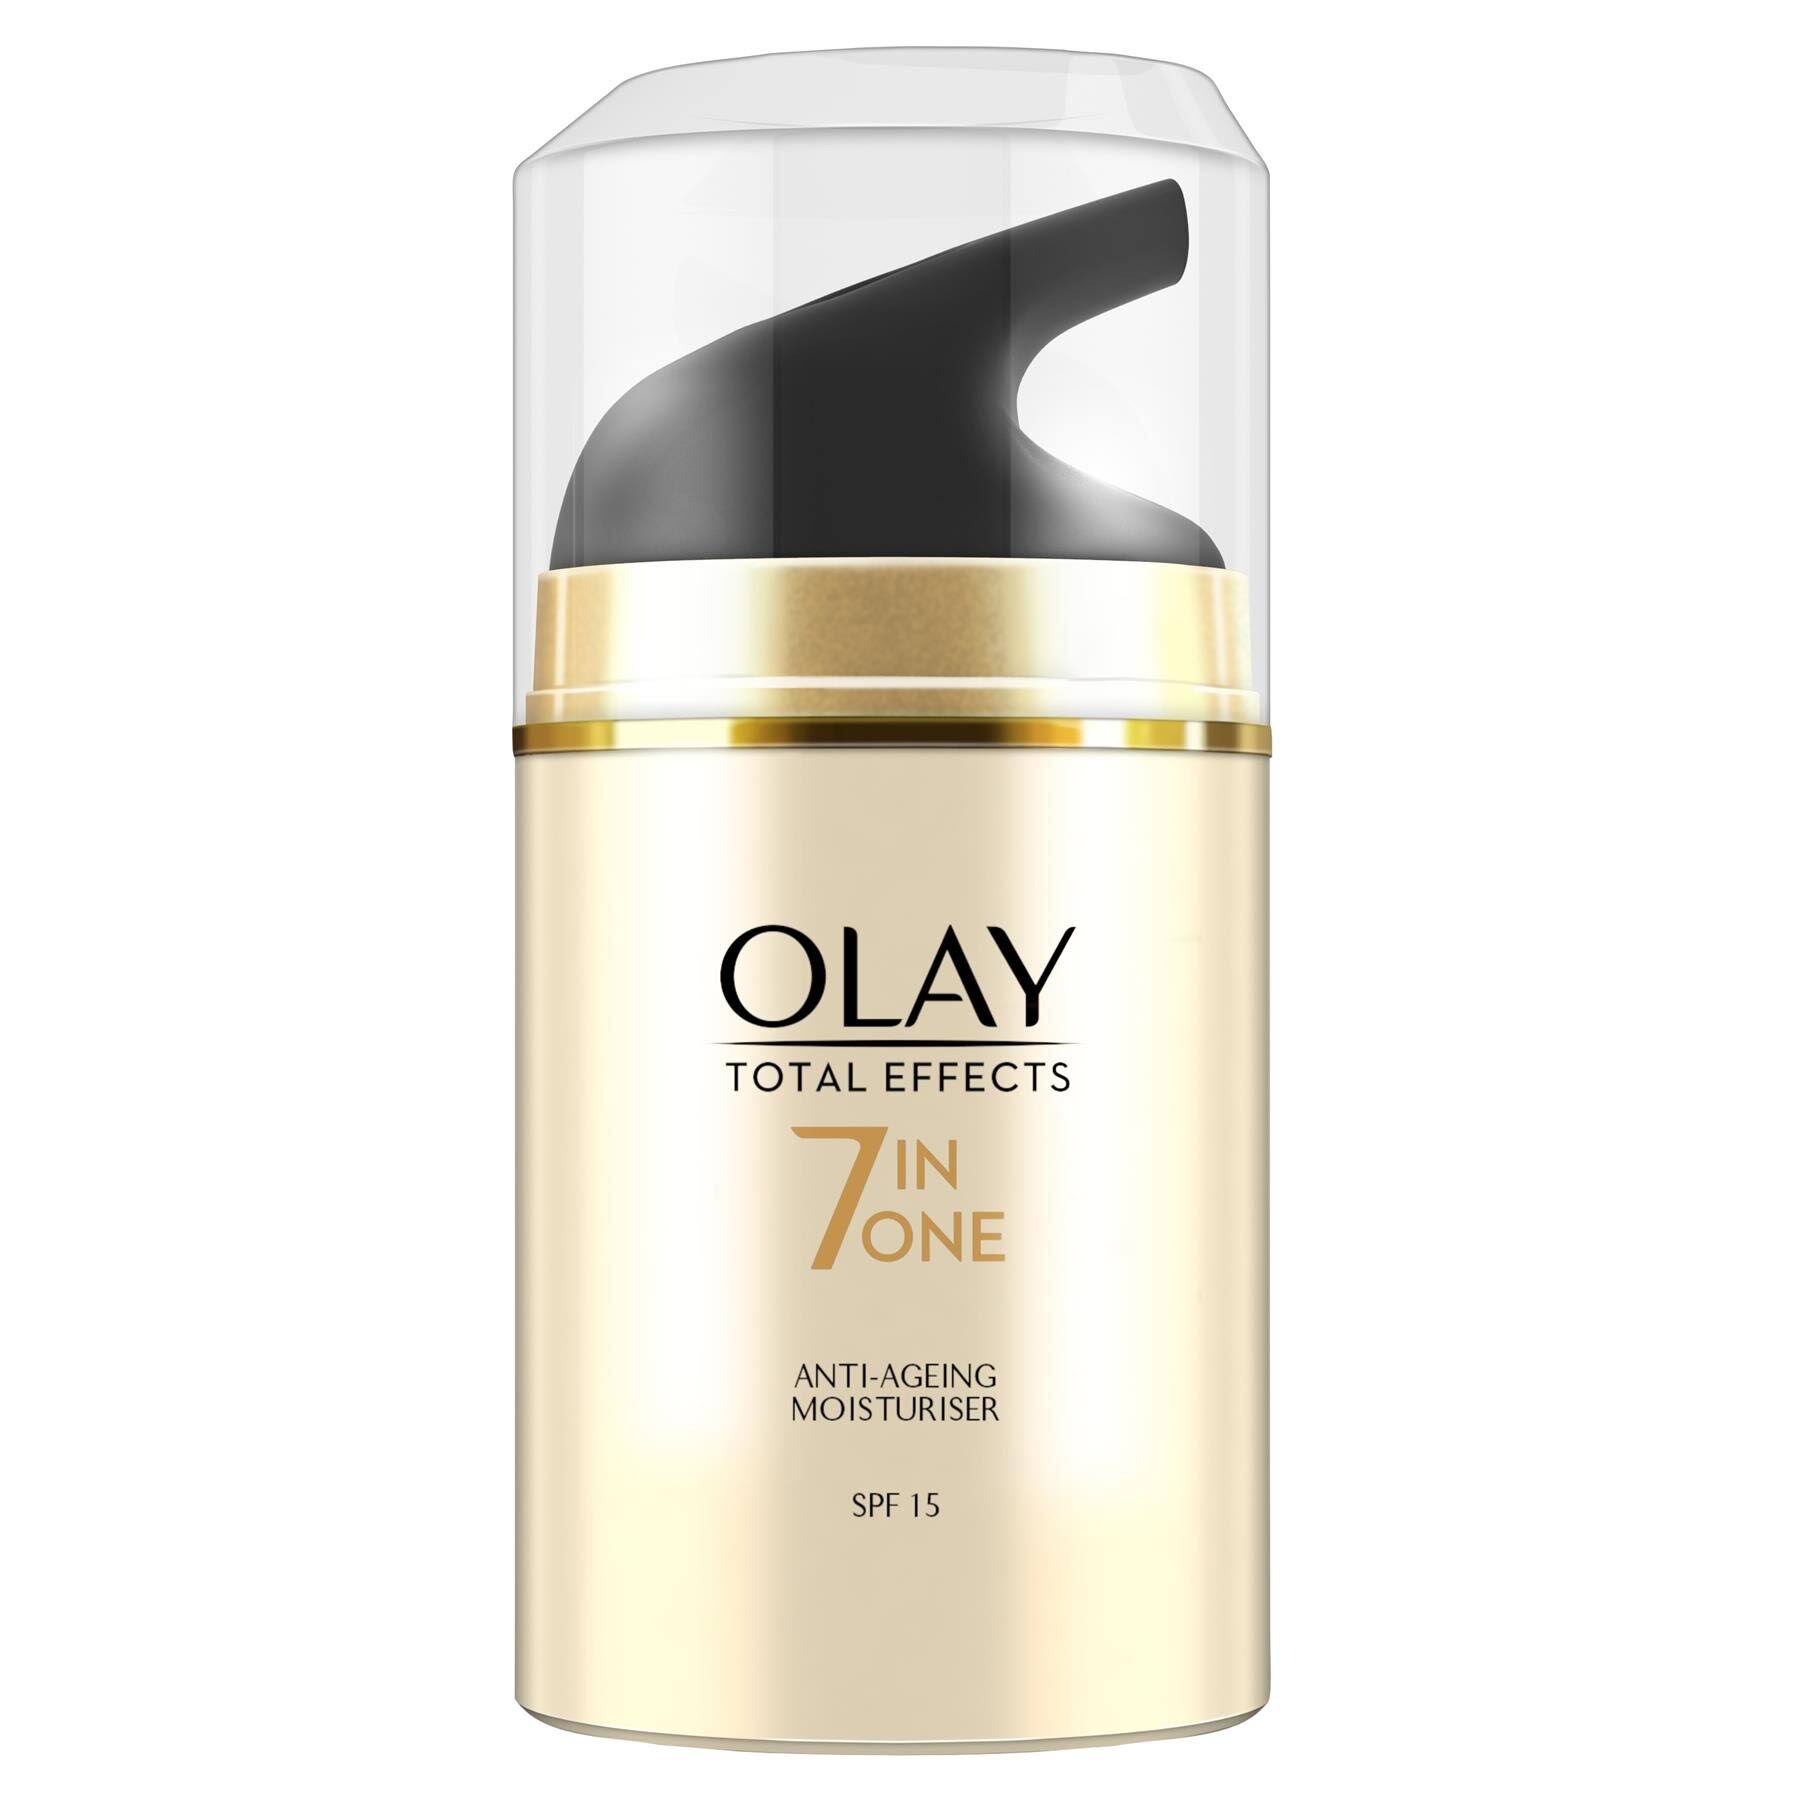 Olay Total Effects Anti Aging Moisturizer - 50ml, SPF 15